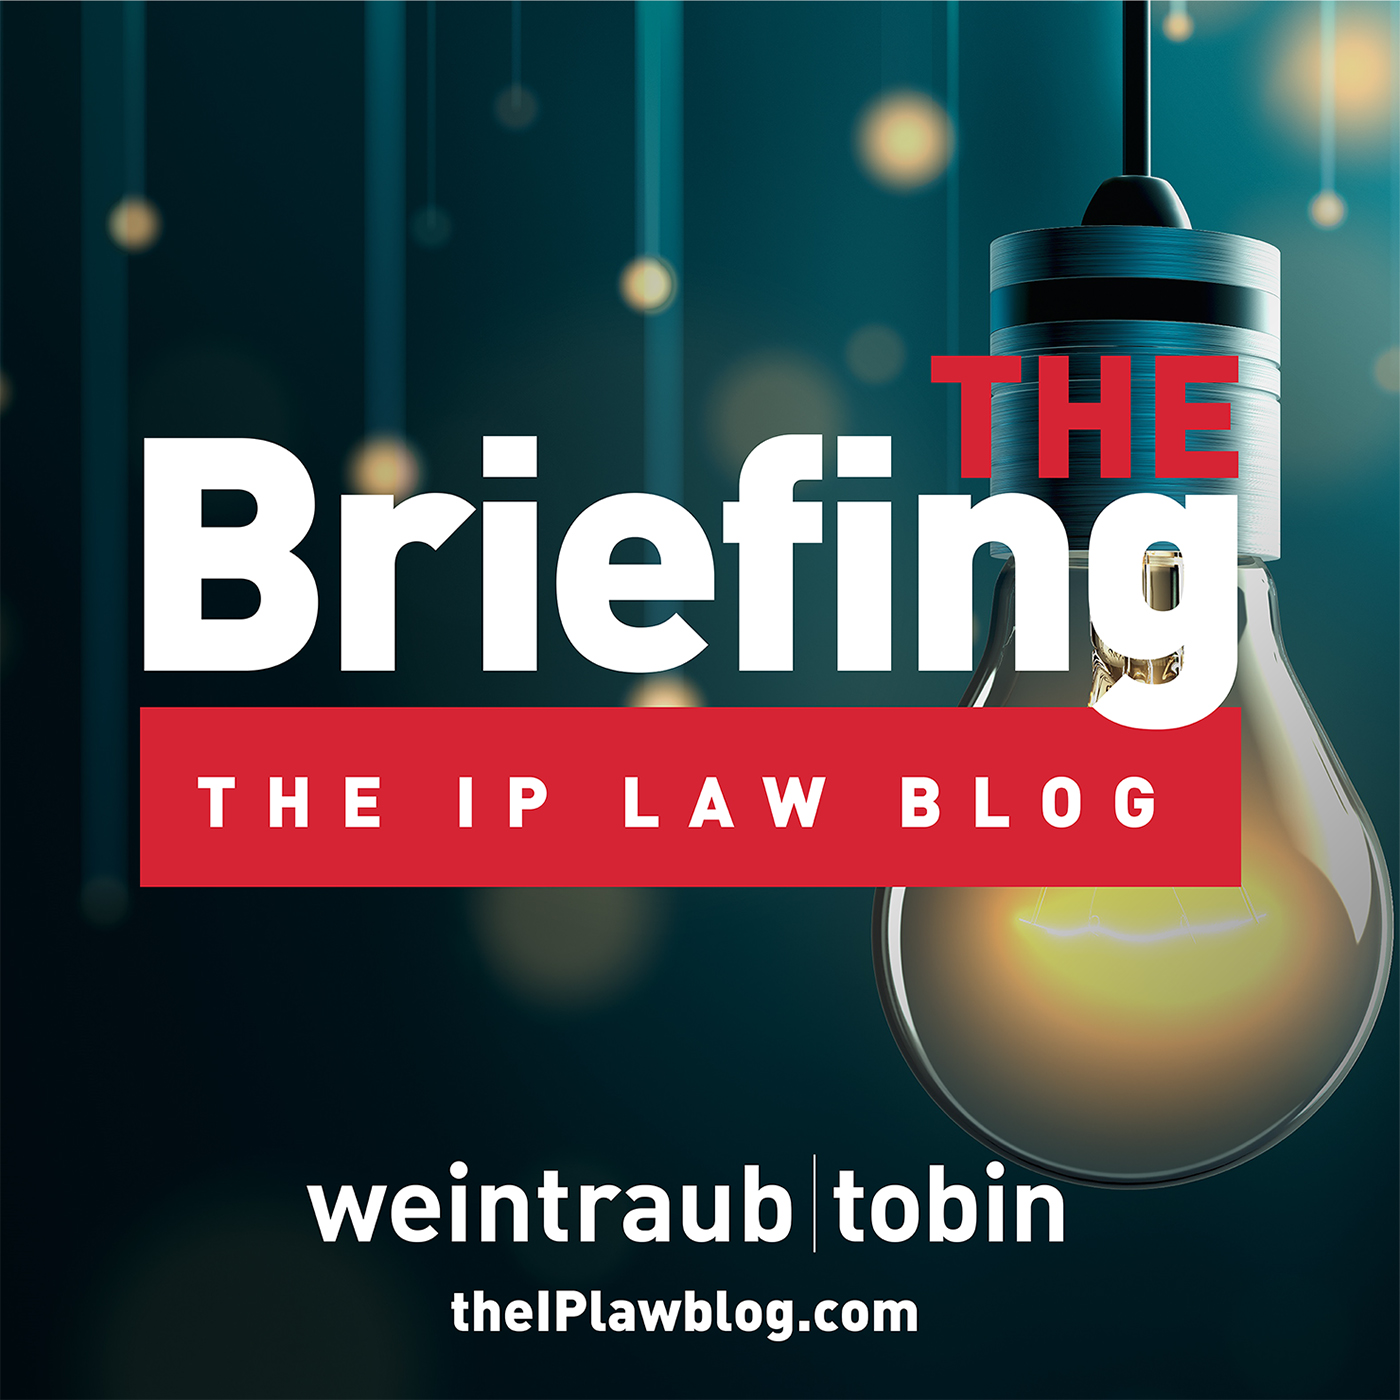 The Briefing from the IP Law Blog